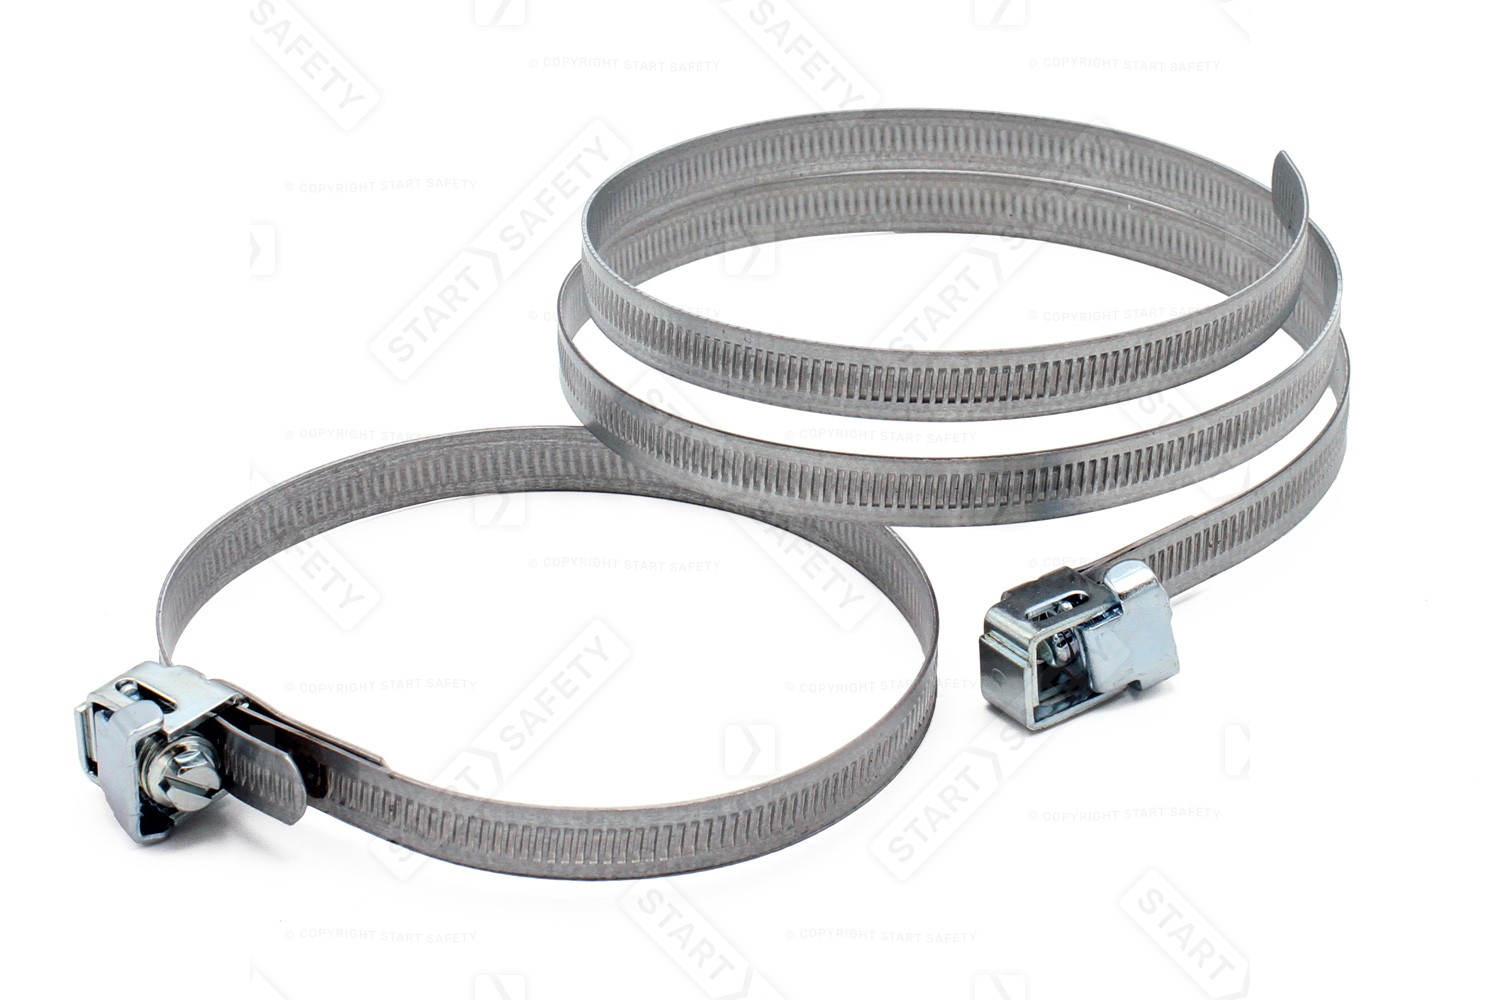 Jubilee quick-release hose clamp